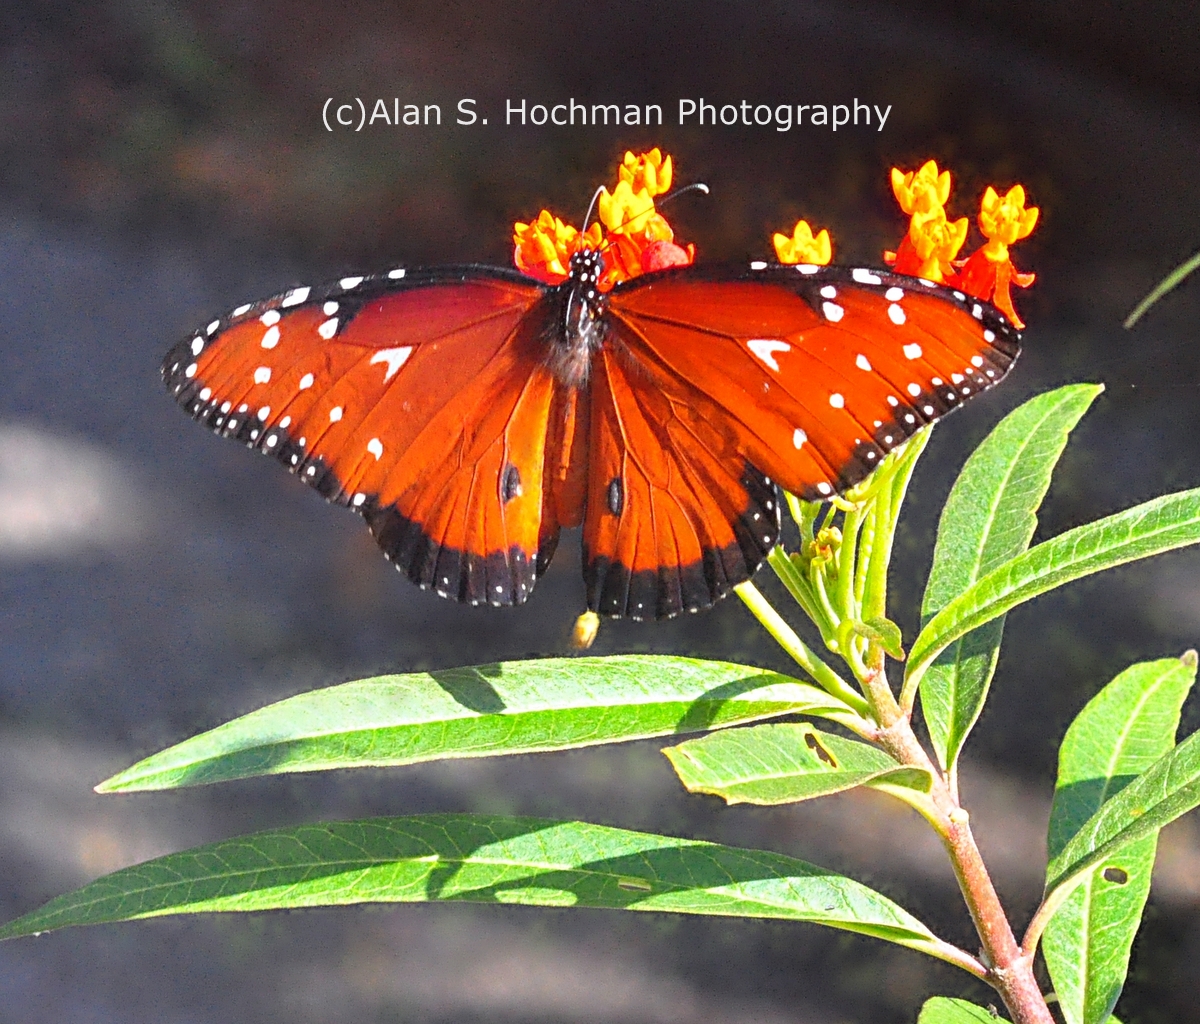 "Queen Butterfly at Enchanted Forest Park"